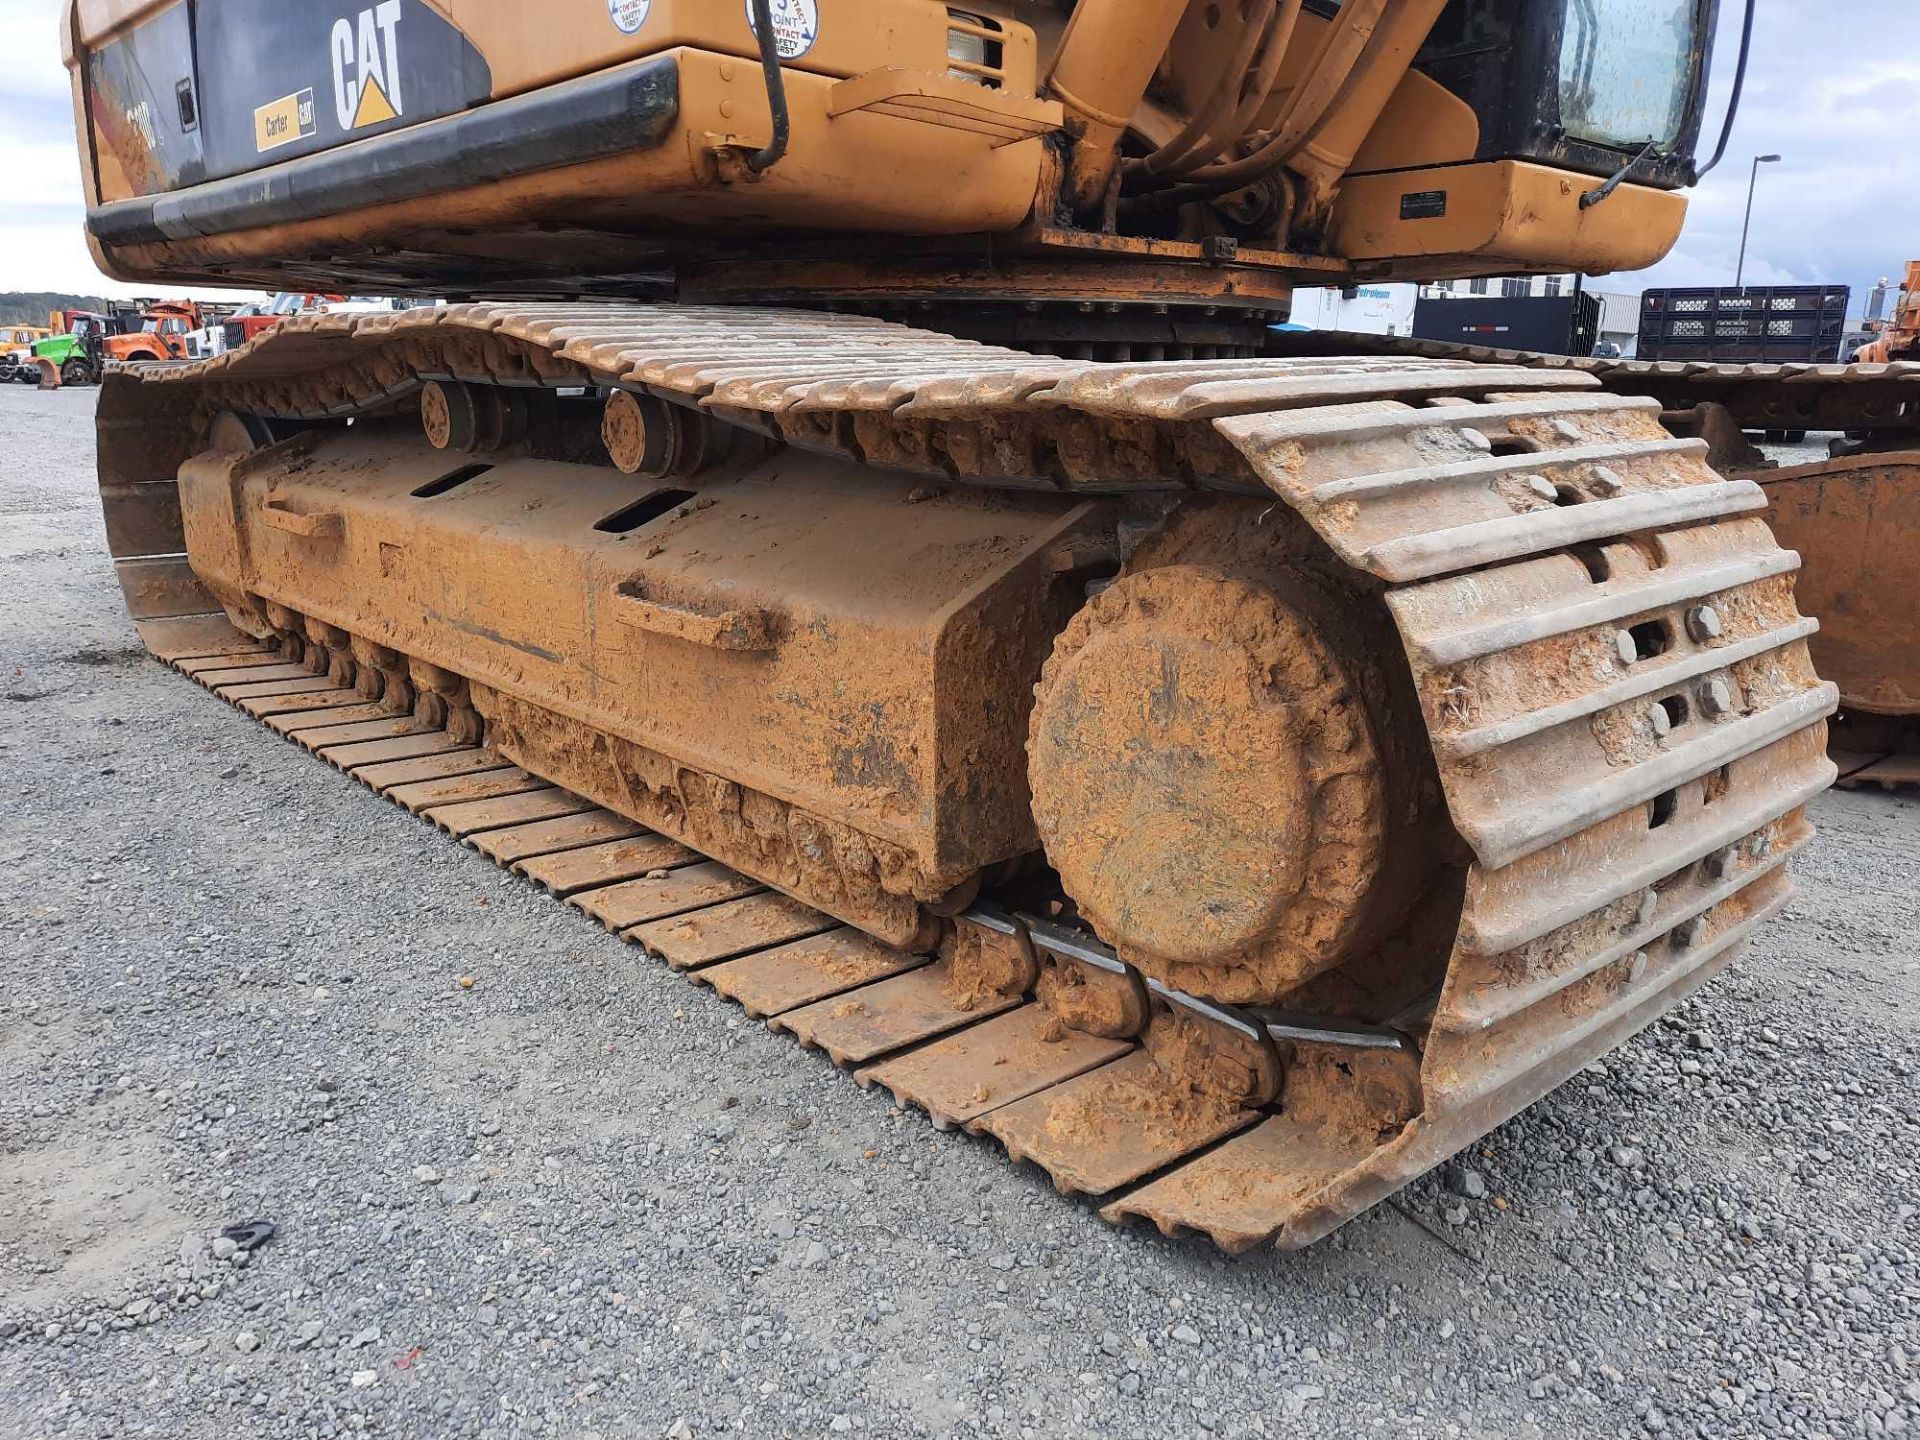 (SUBJECT TO OWNER CONFIRMATION) 2007 Caterpillar 330DL Excavator - Image 53 of 80